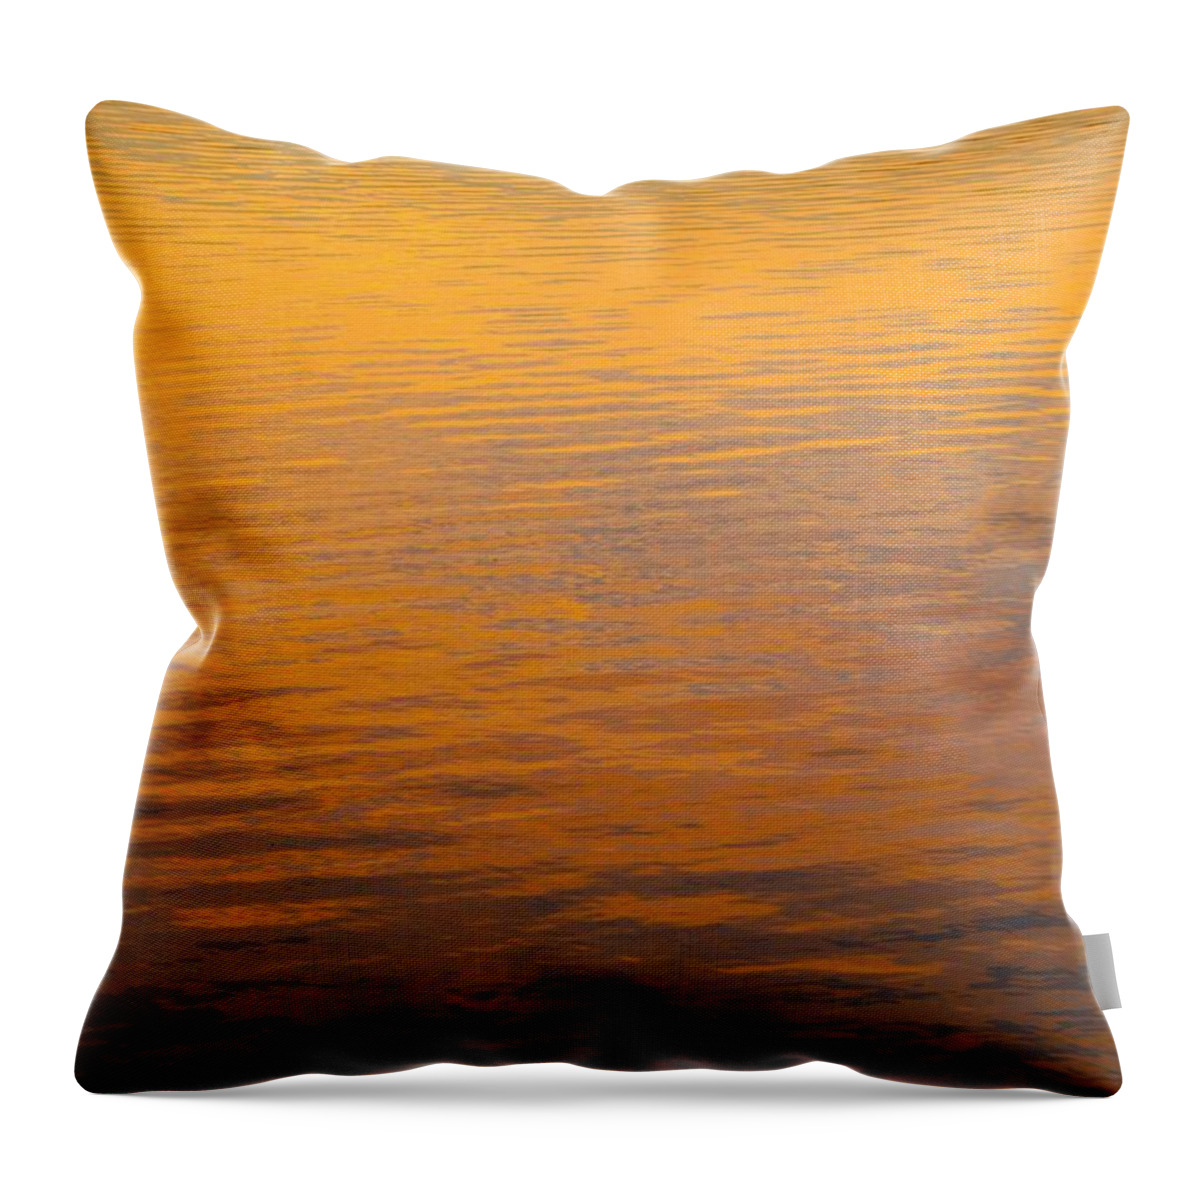  Throw Pillow featuring the photograph Golden Sunset Reflection Leaving Block Island by Polly Castor